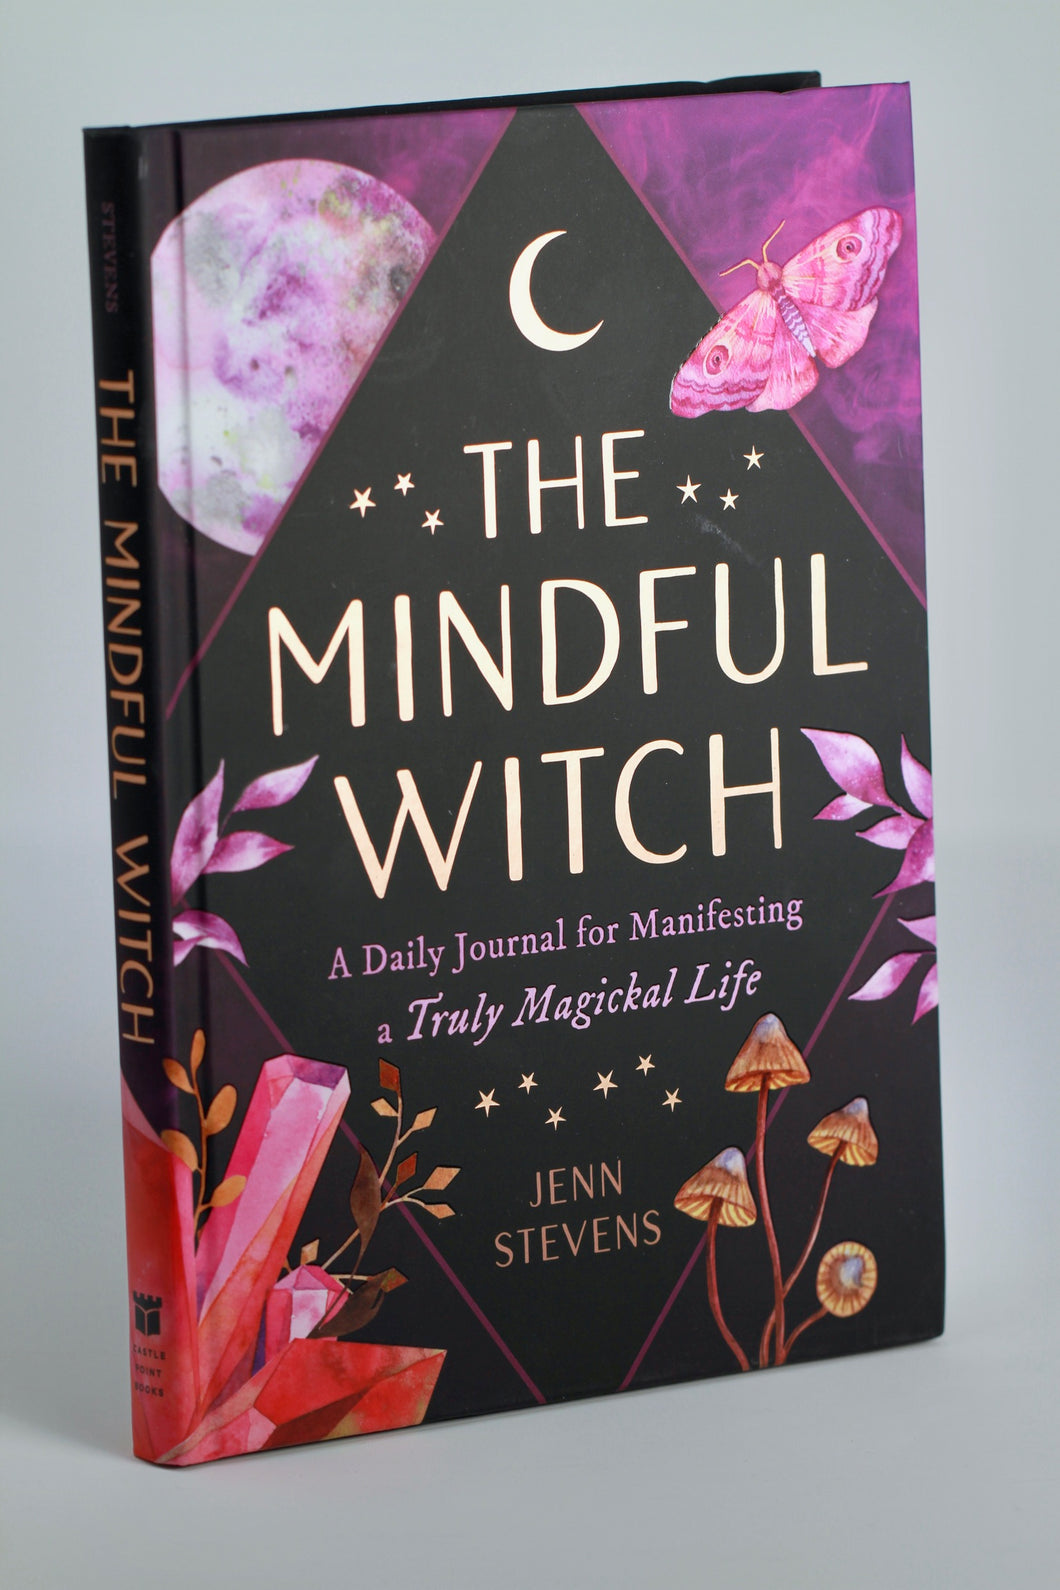 The Mindful Witch - Daily Journal for Manifesting